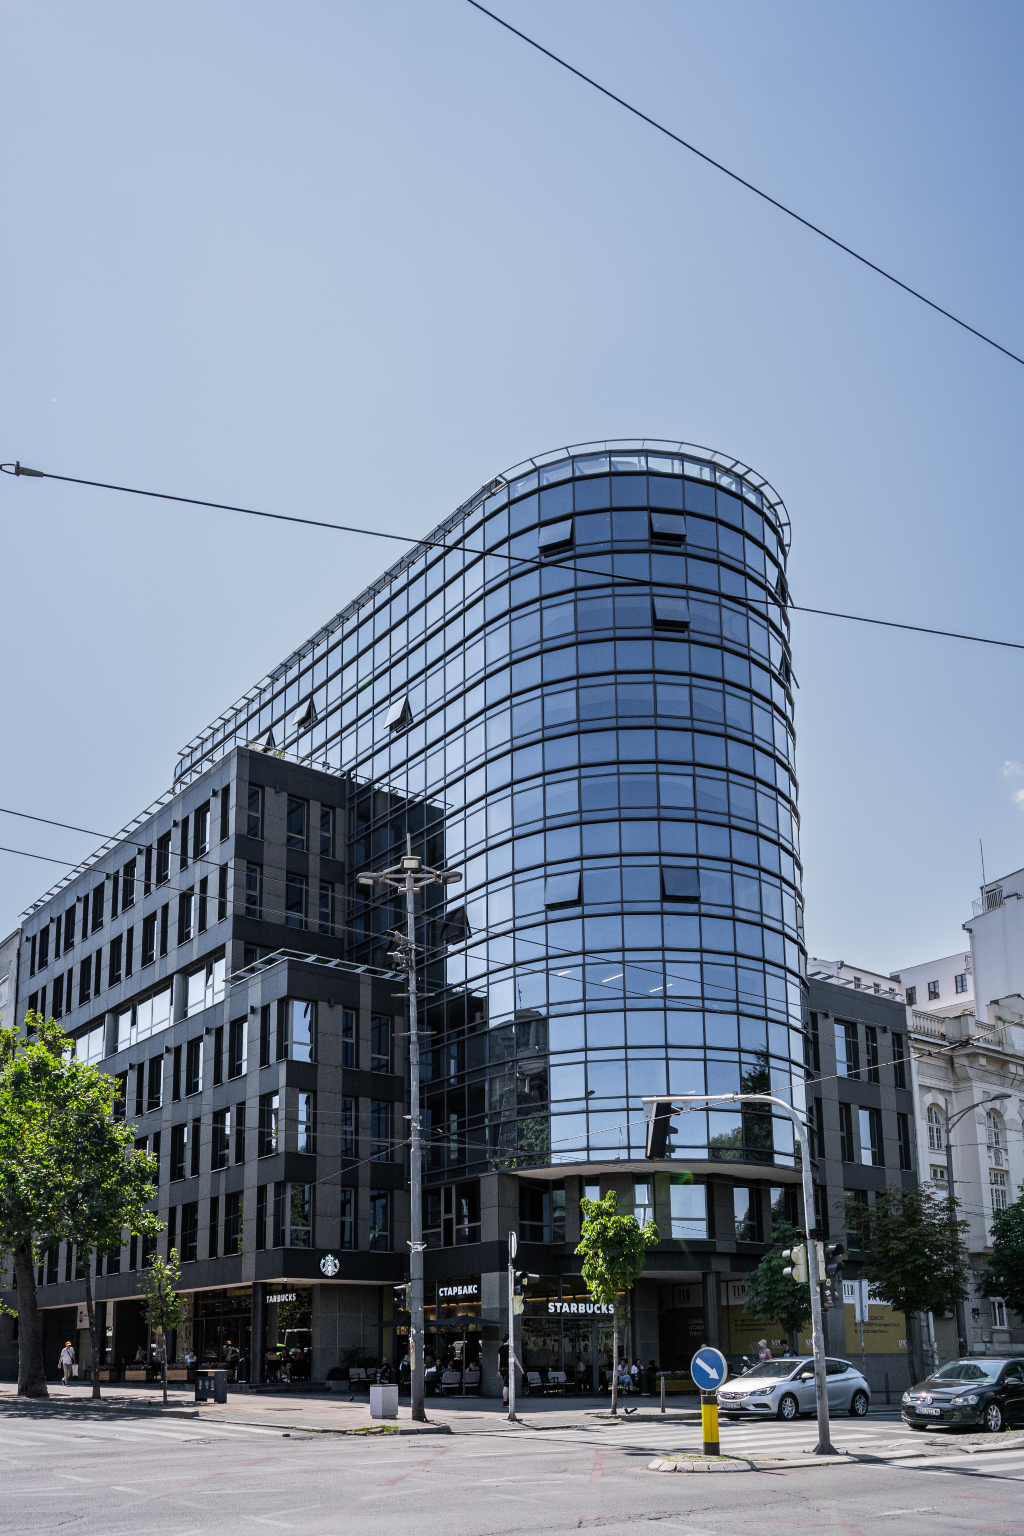 New Look of Legendary Location Tri Lista Duvana – Office Building TLD Belgrade Opens in Official Ceremony